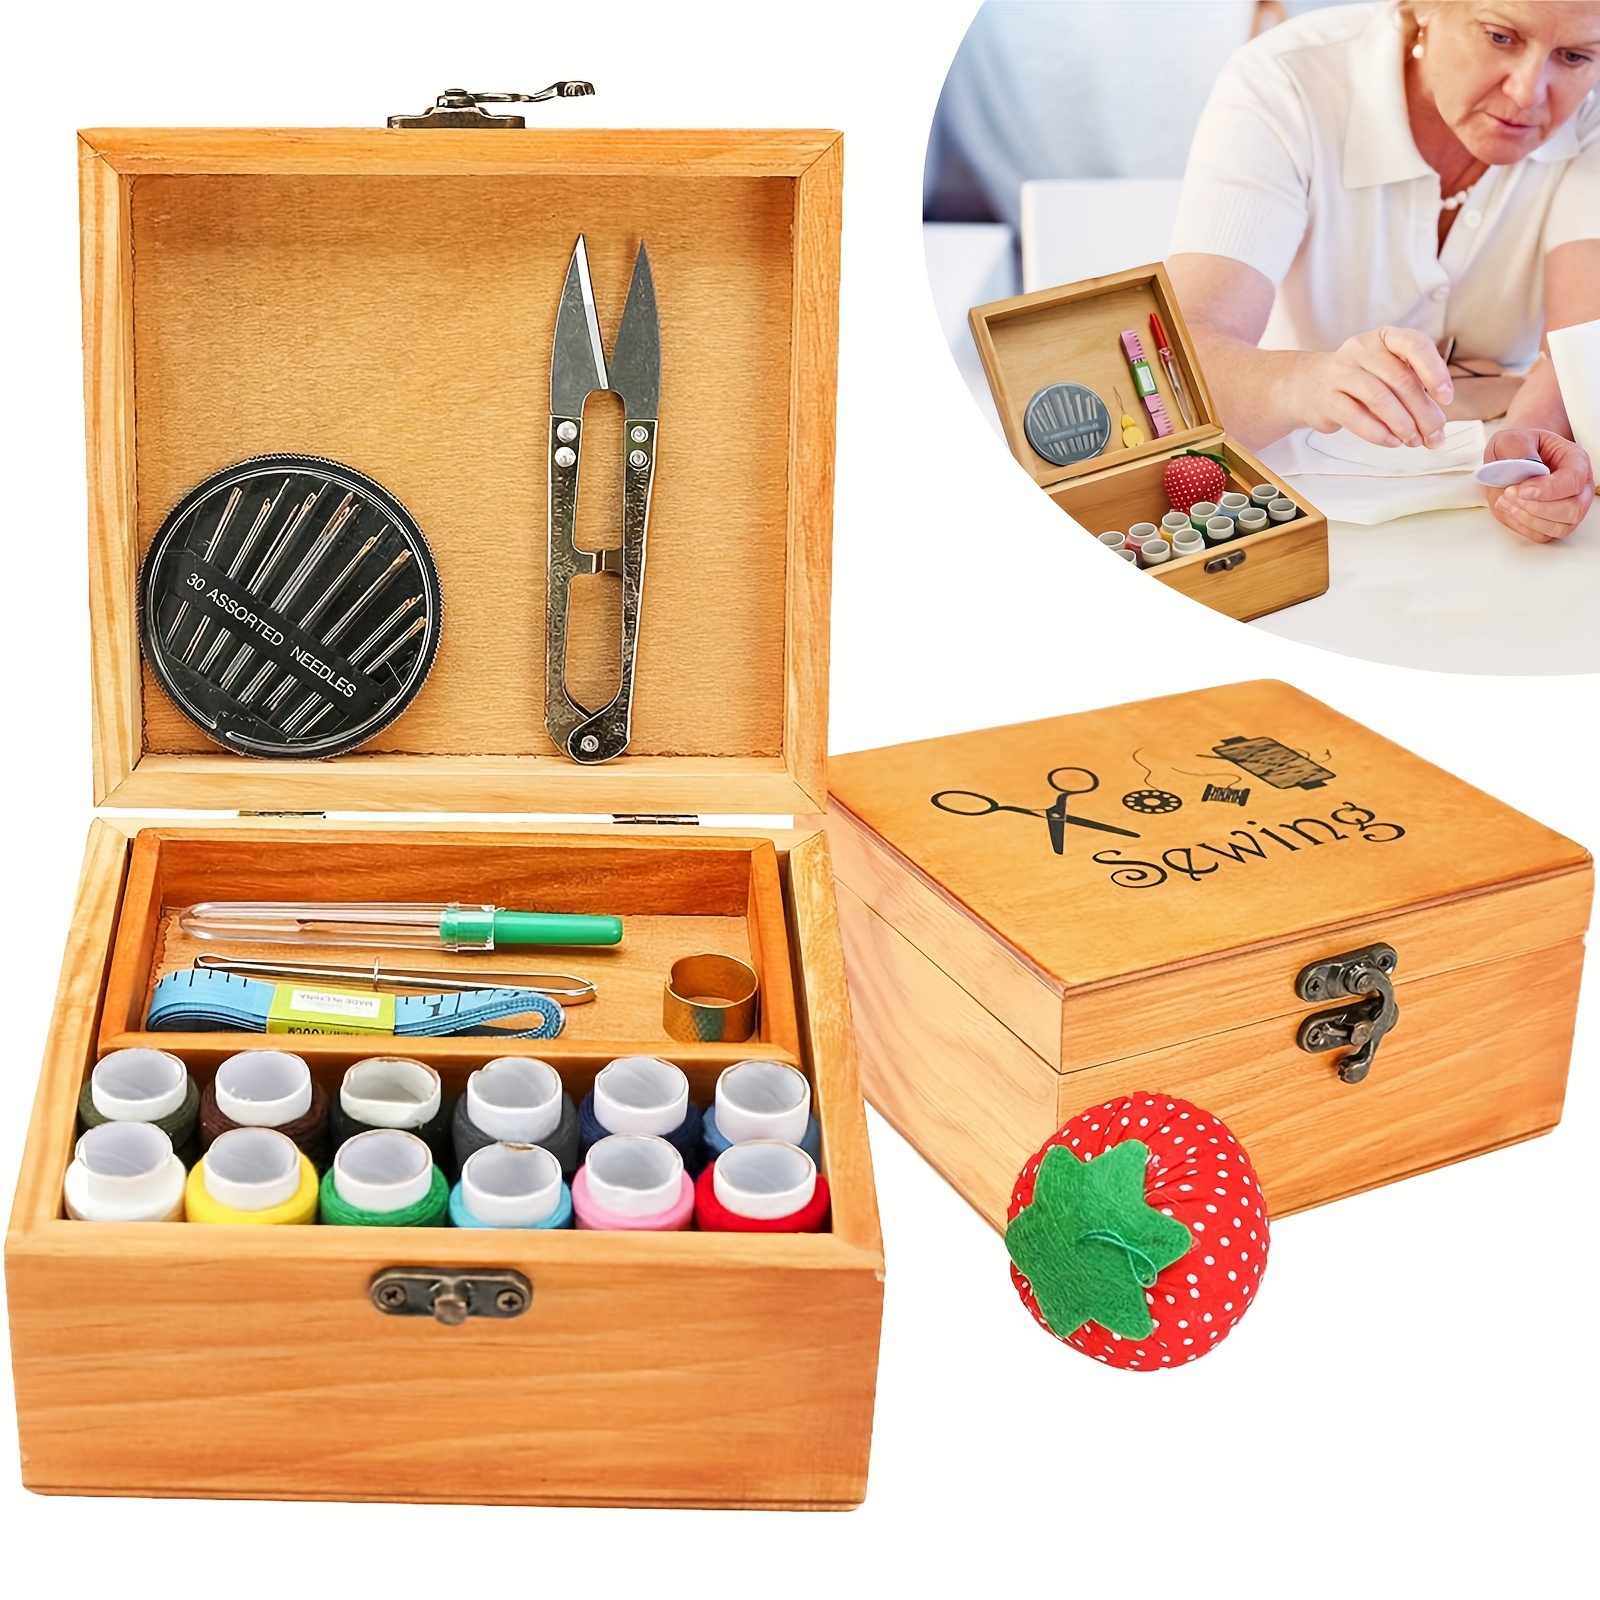 1 Set DIY Sewing Kit, Wooden Sewing Kit Box For Adults - Organizational  Wooden Sewing Basket With Accessories - Home Sewing Stitching Repair Kit  For A